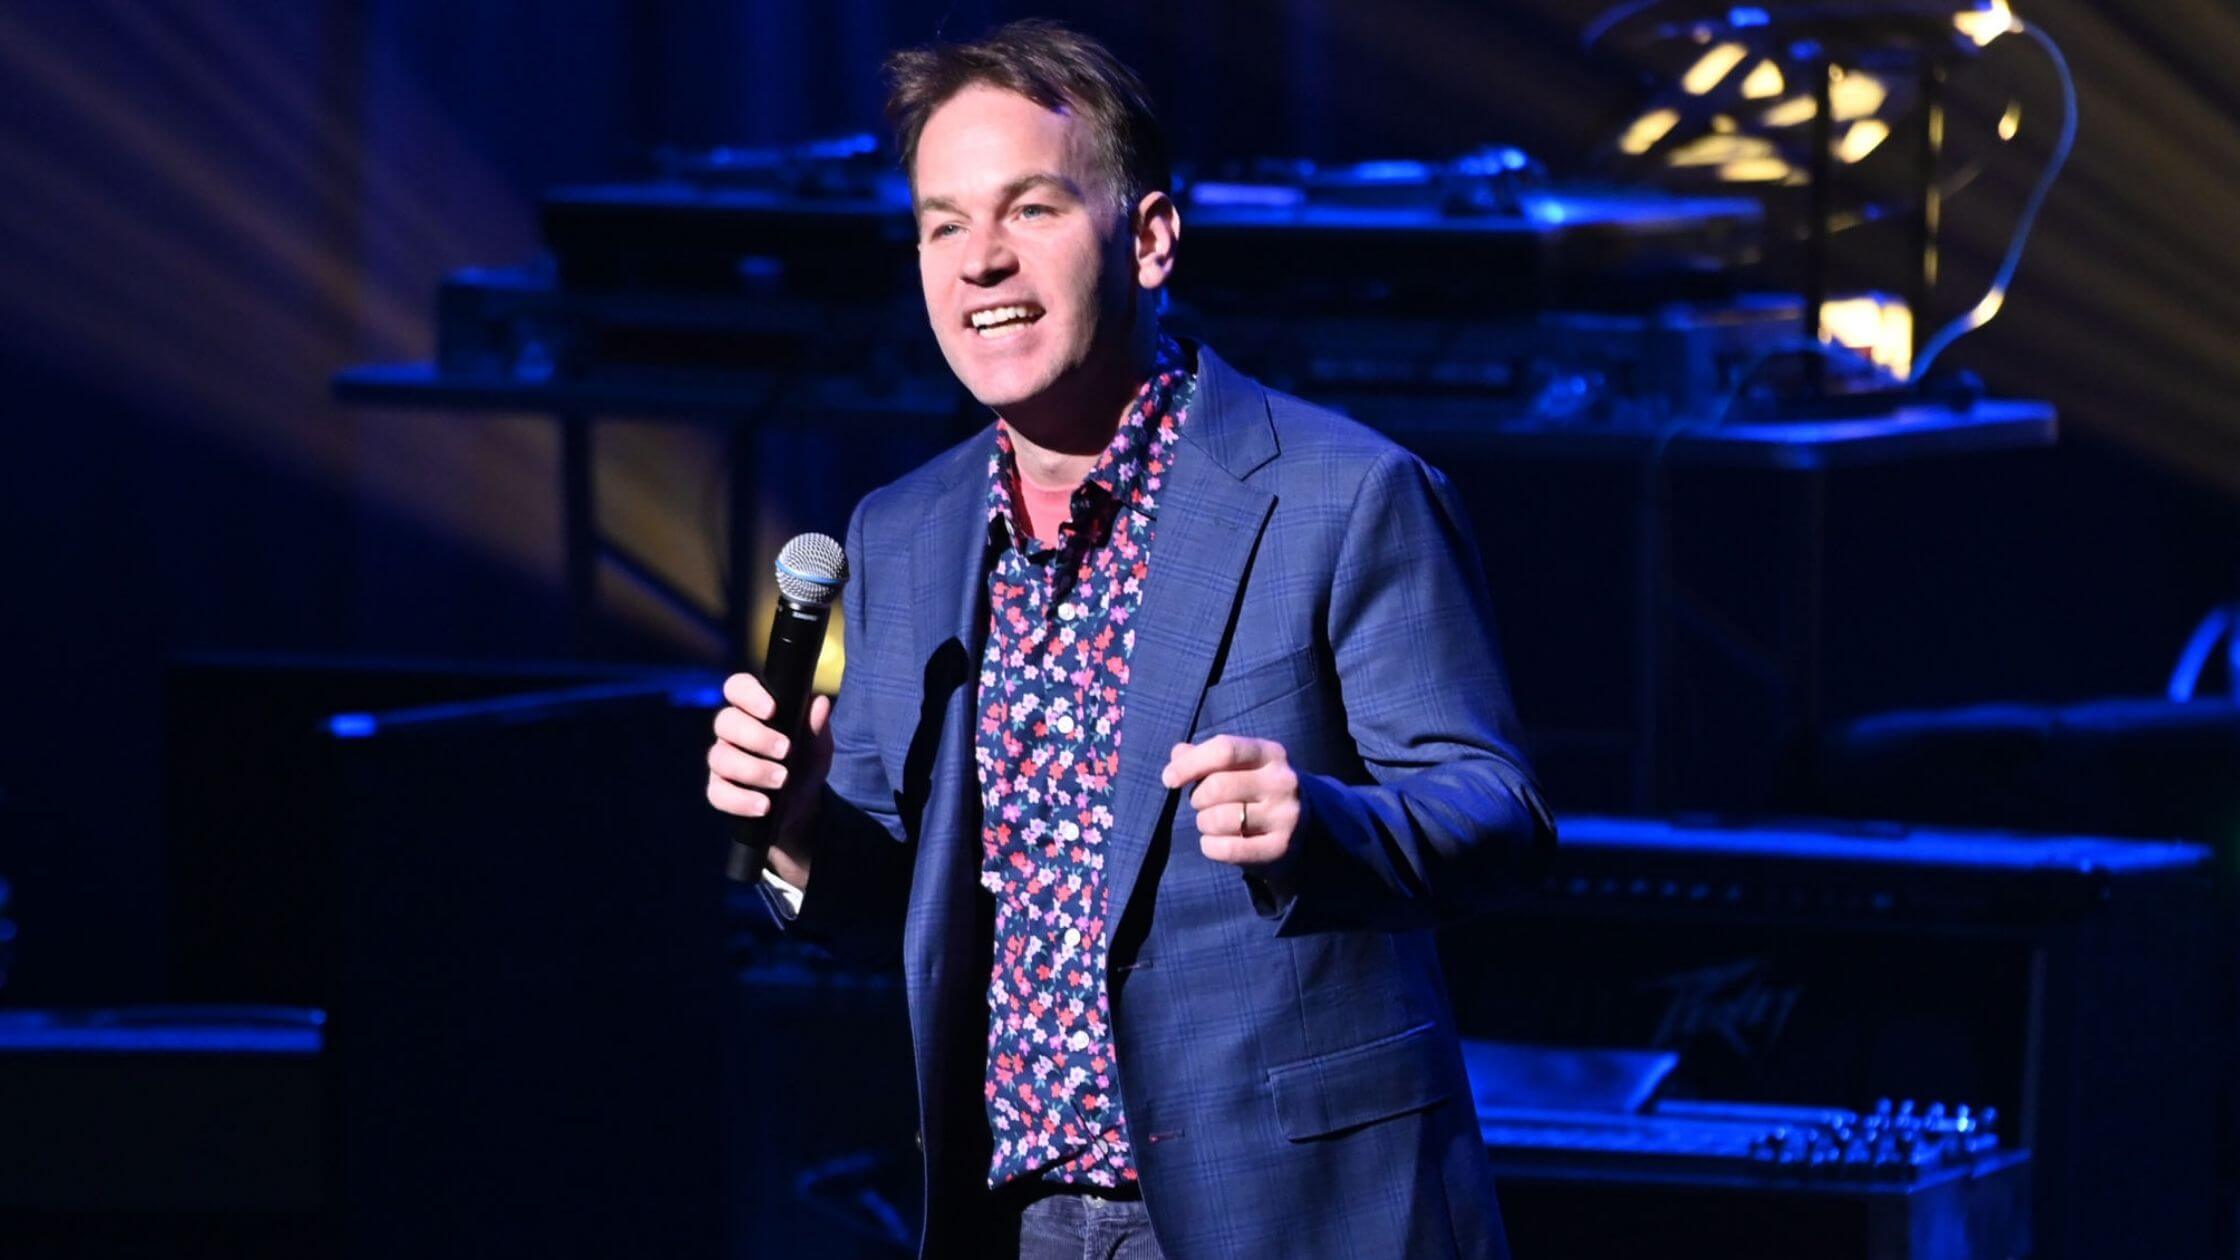 Who Is Mike Birbiglia His Net Worth, Salary, Age, Family Details